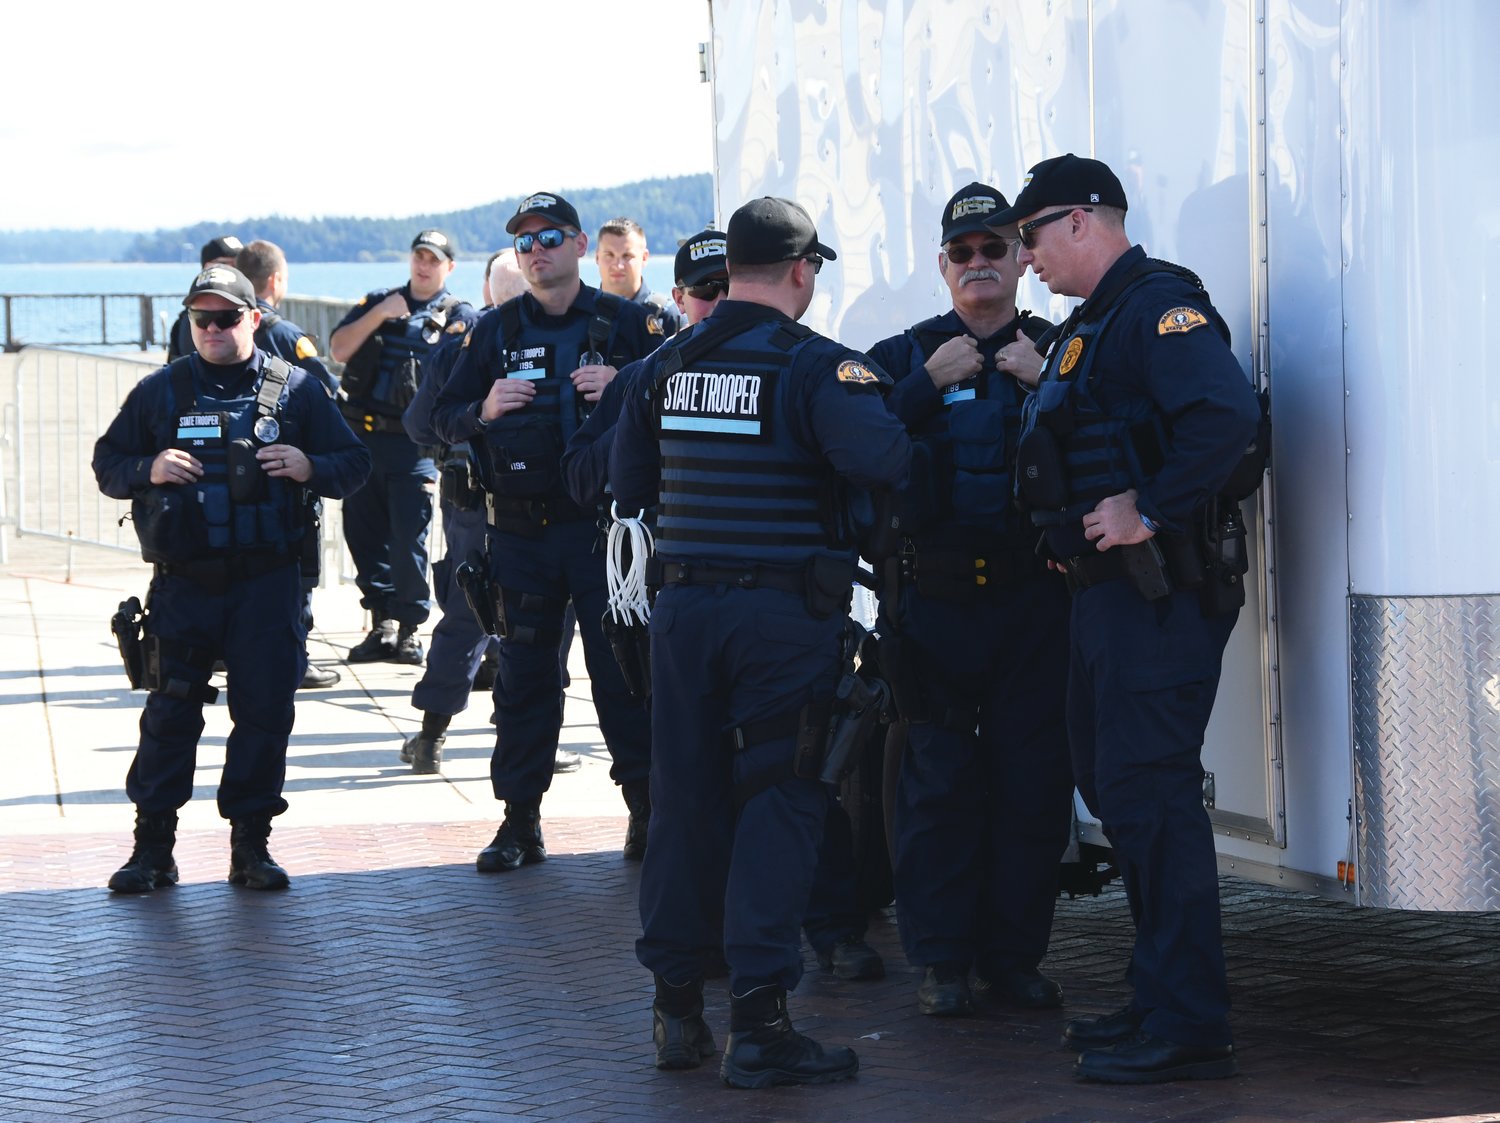 Around 30 or 40 members of law enforcement were visible around Pope Marine Park monitoring the protest.